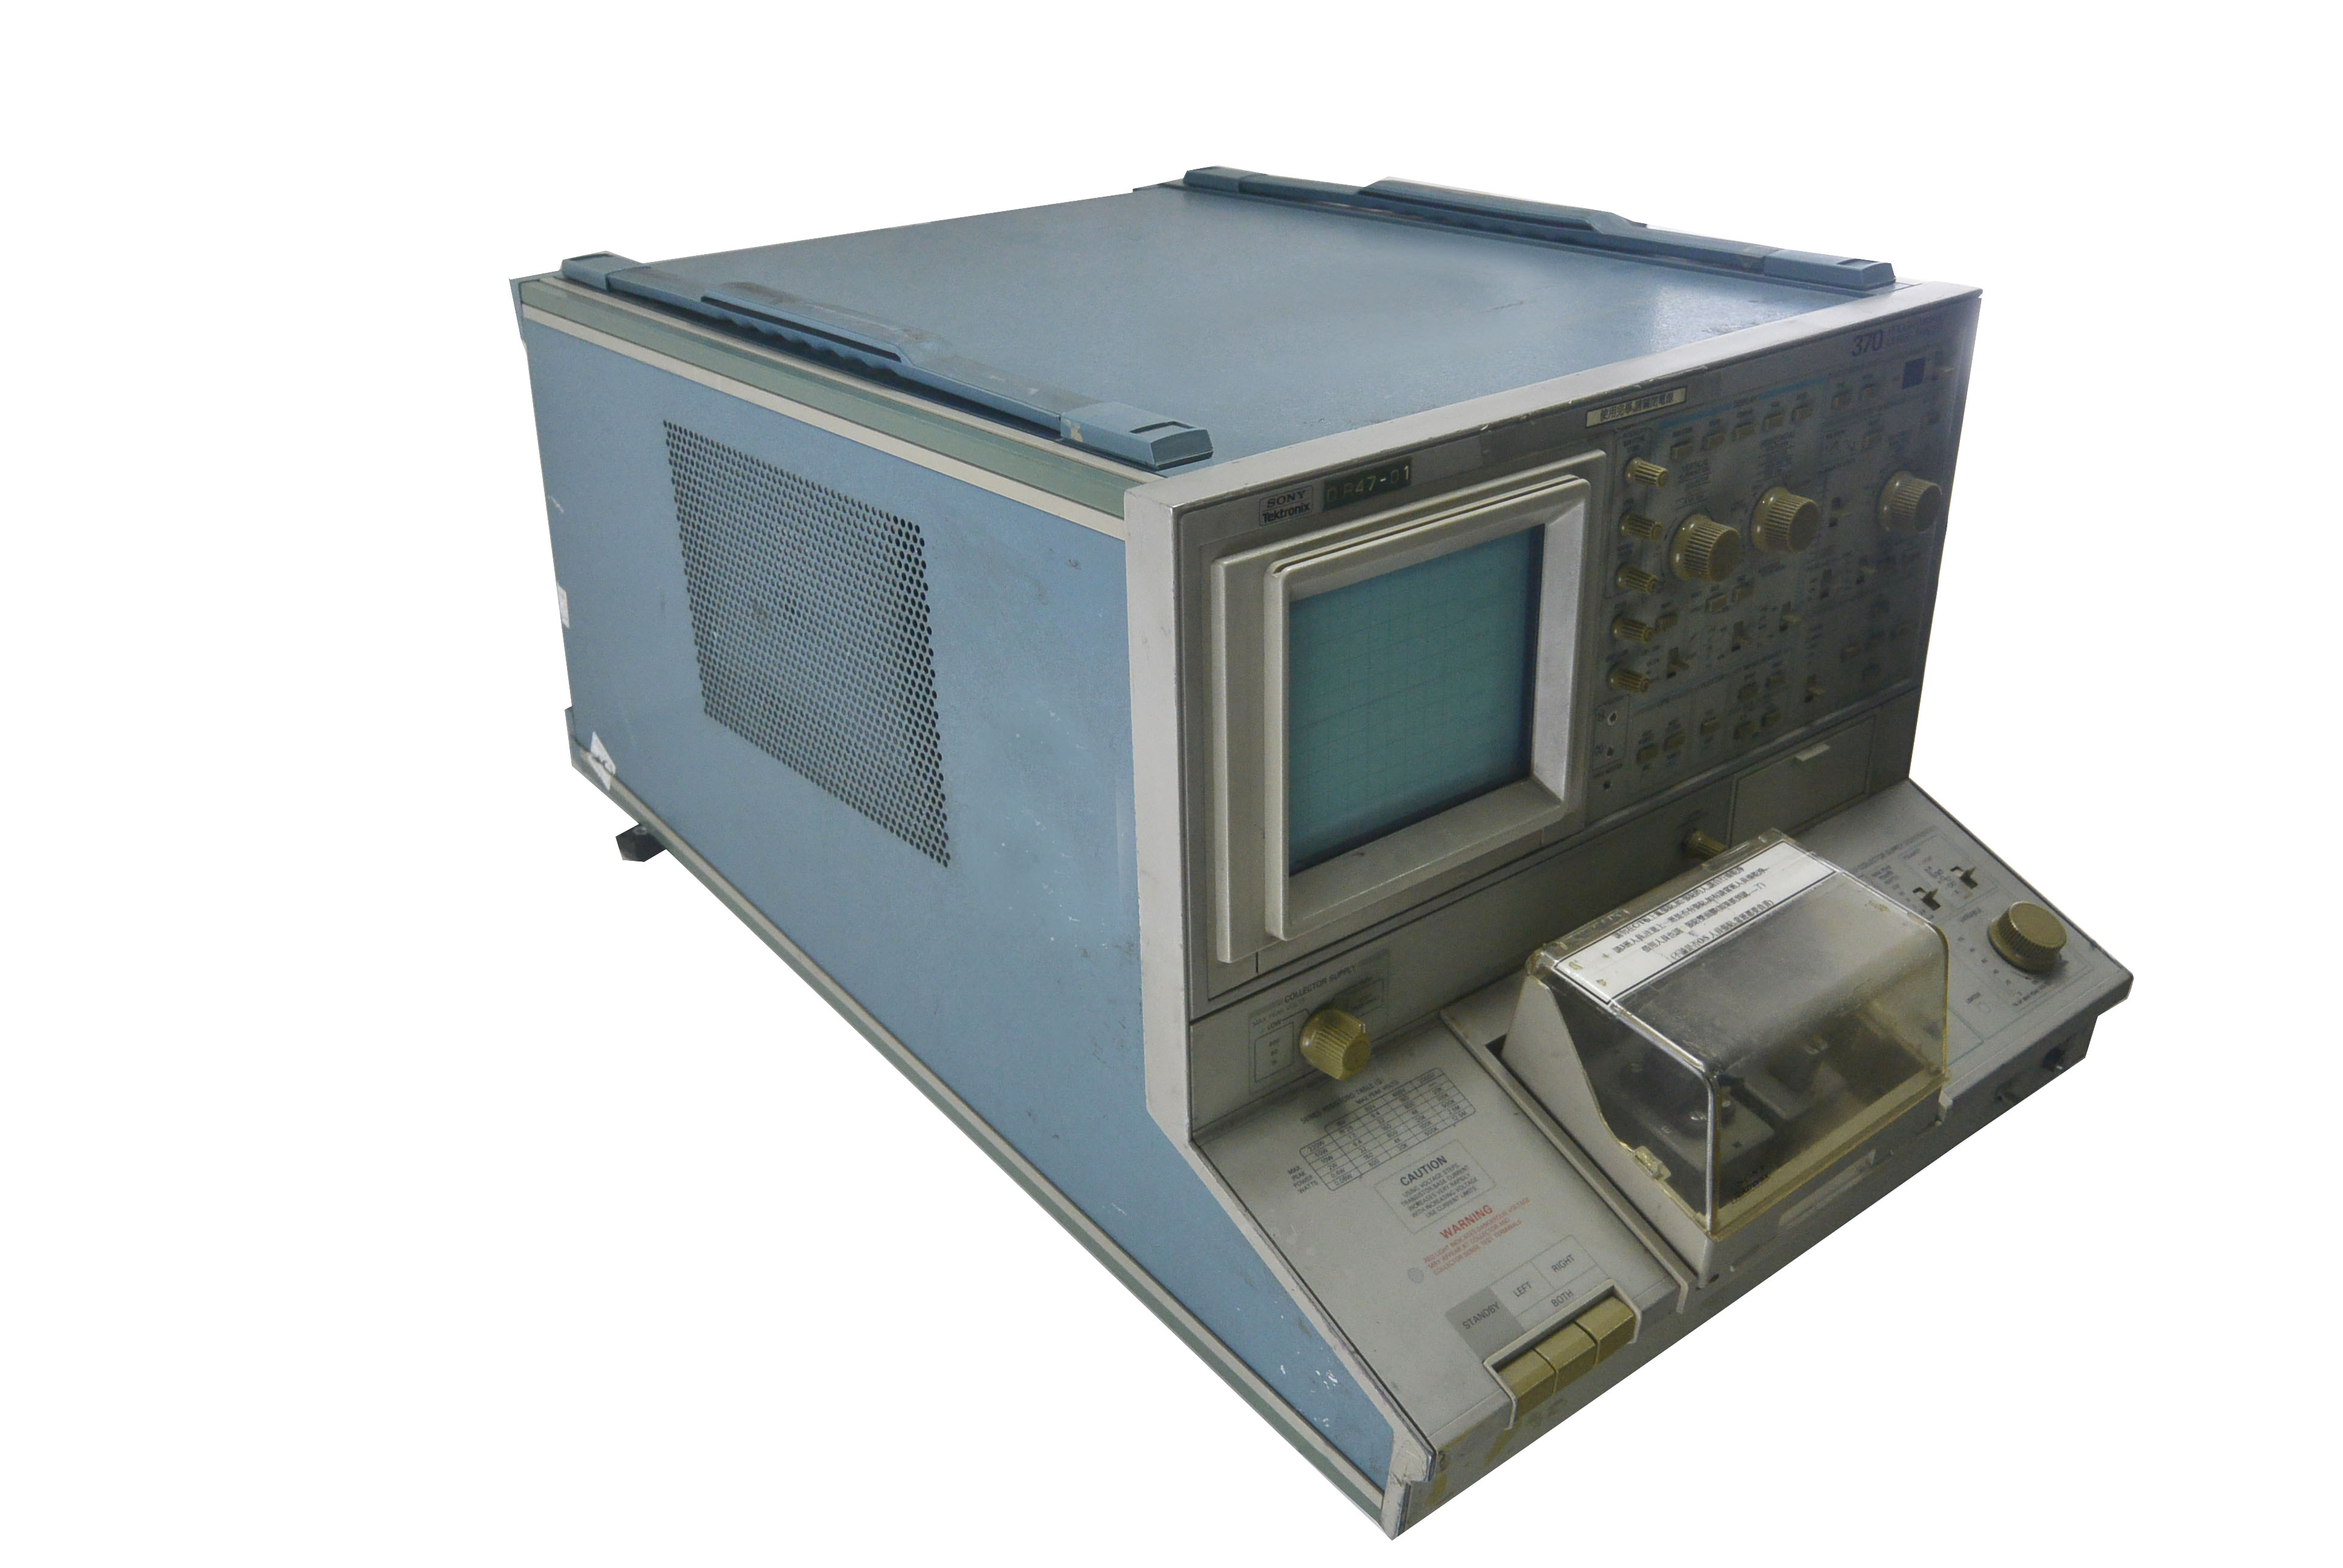 Tektronix 370 High-Resolution Programmable Curve Tracer